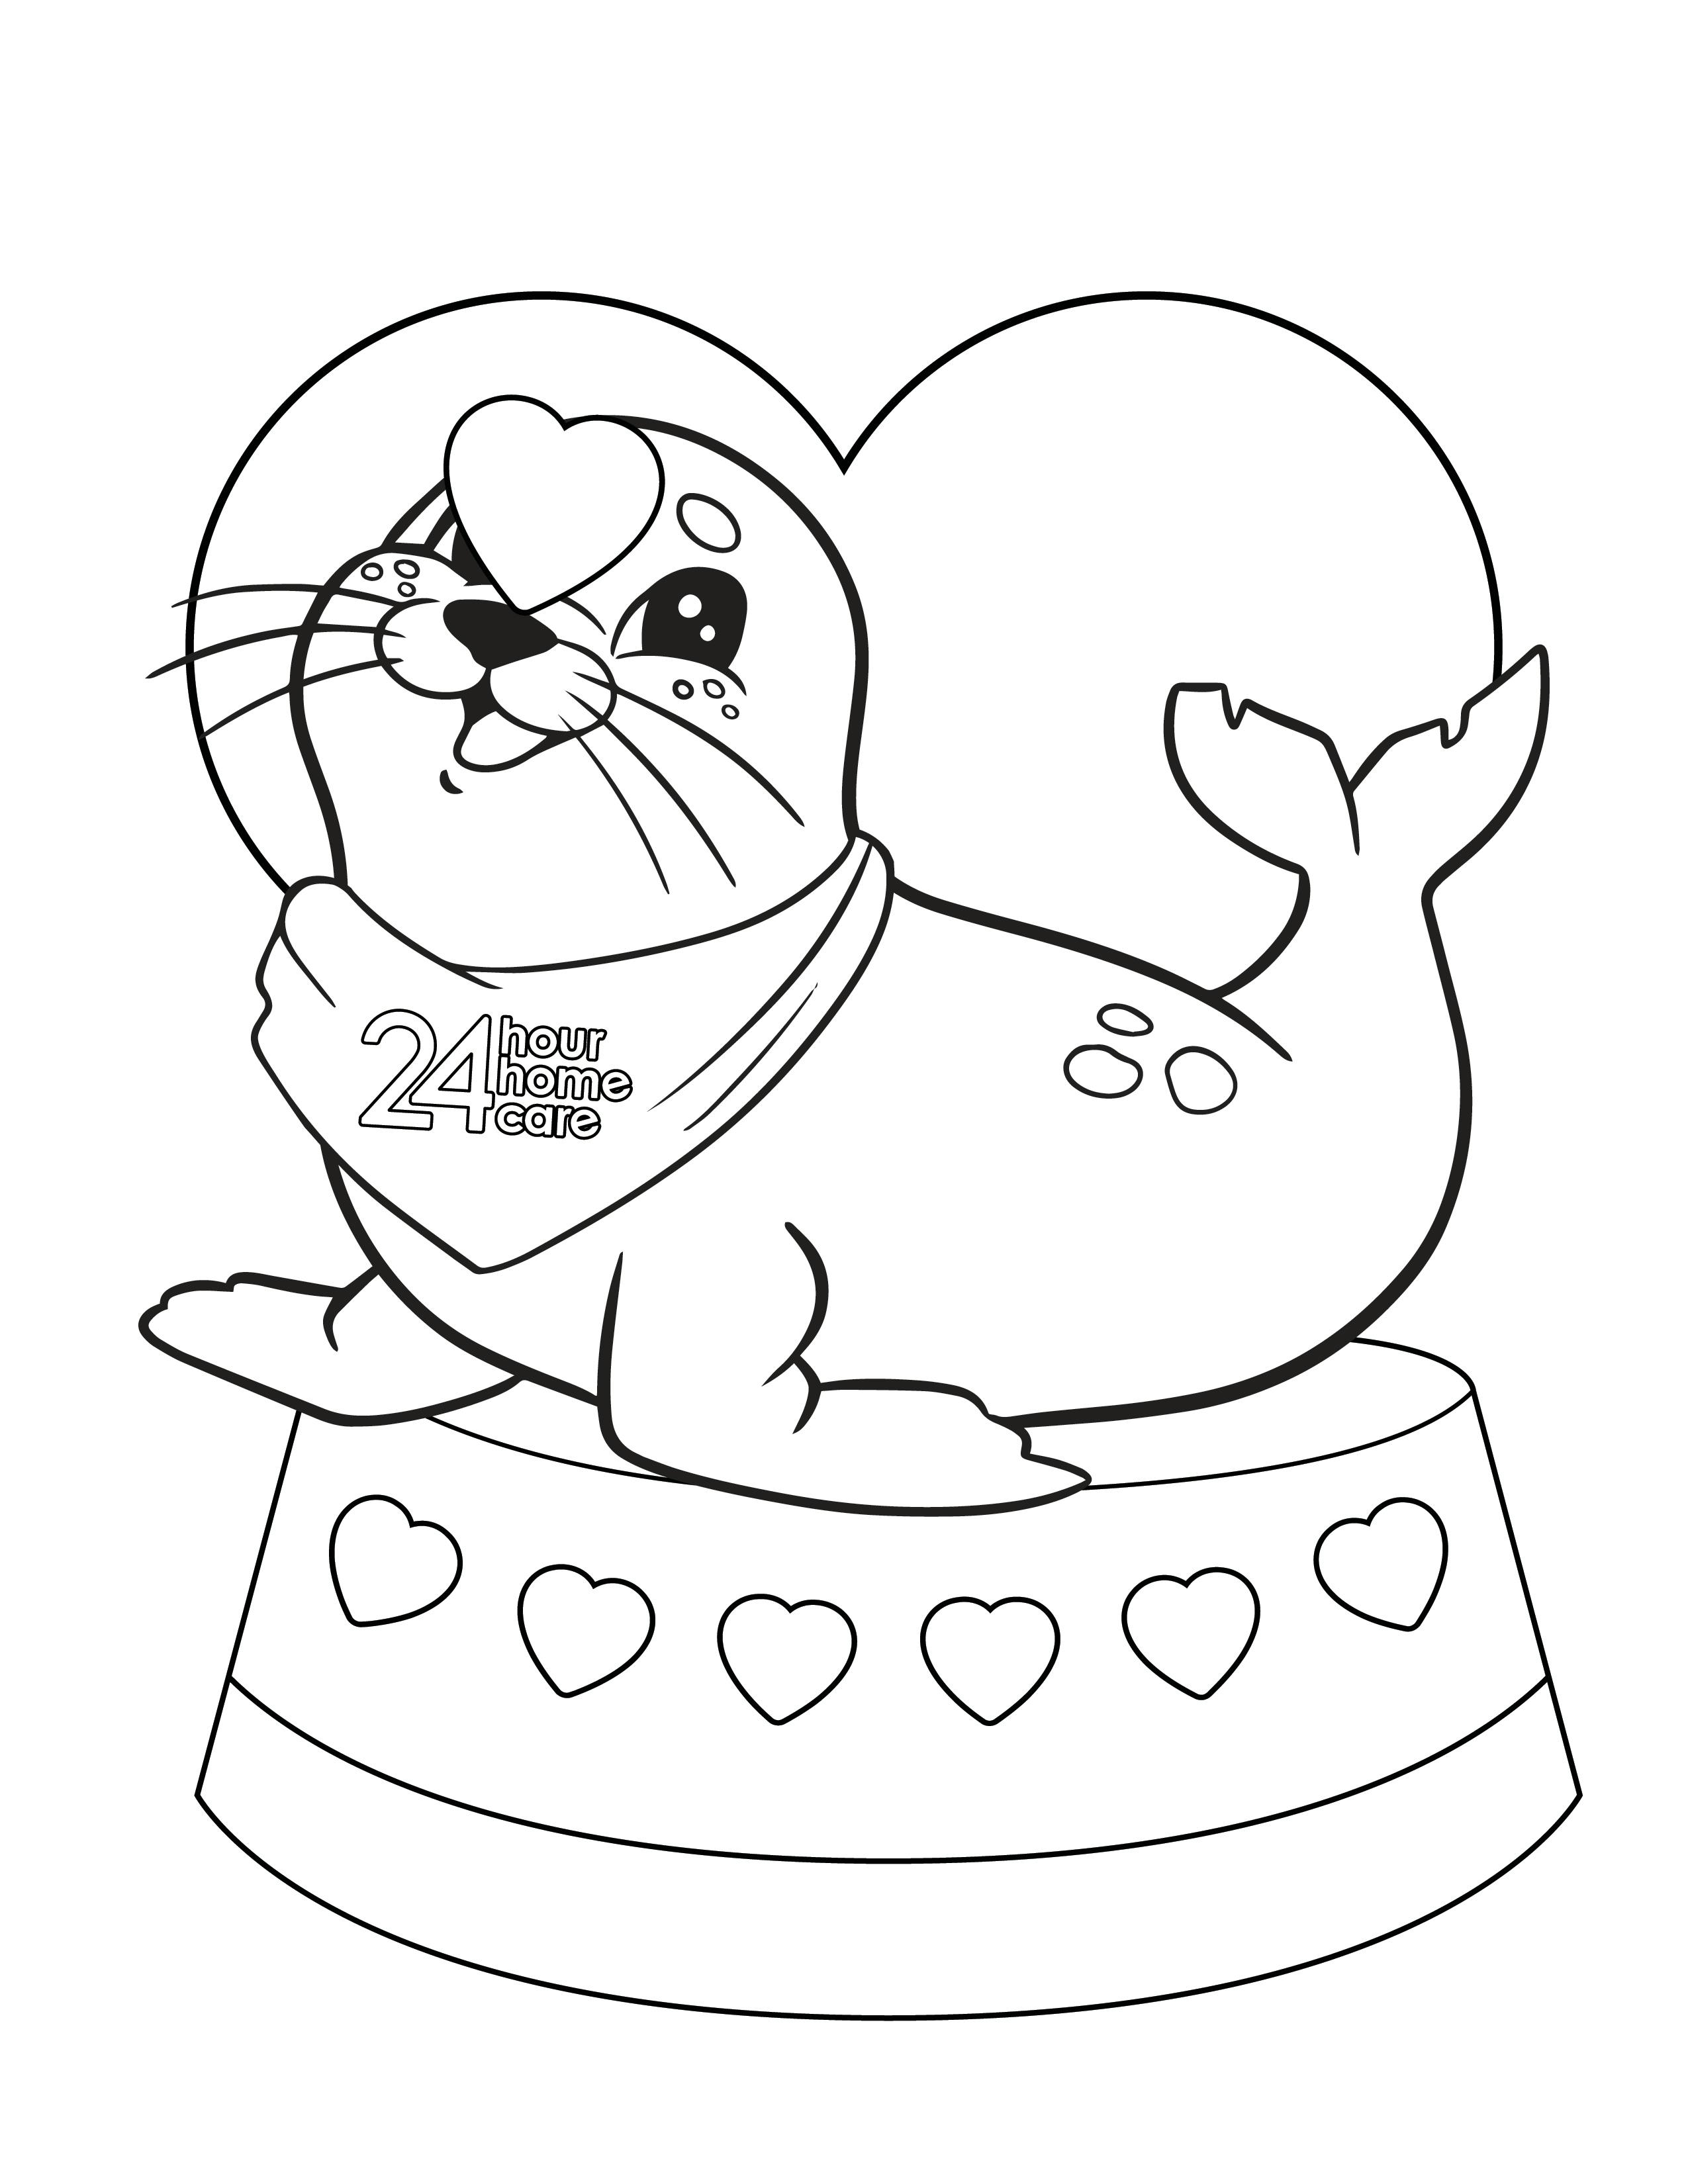 Seal Valentine's Day coloring sheet